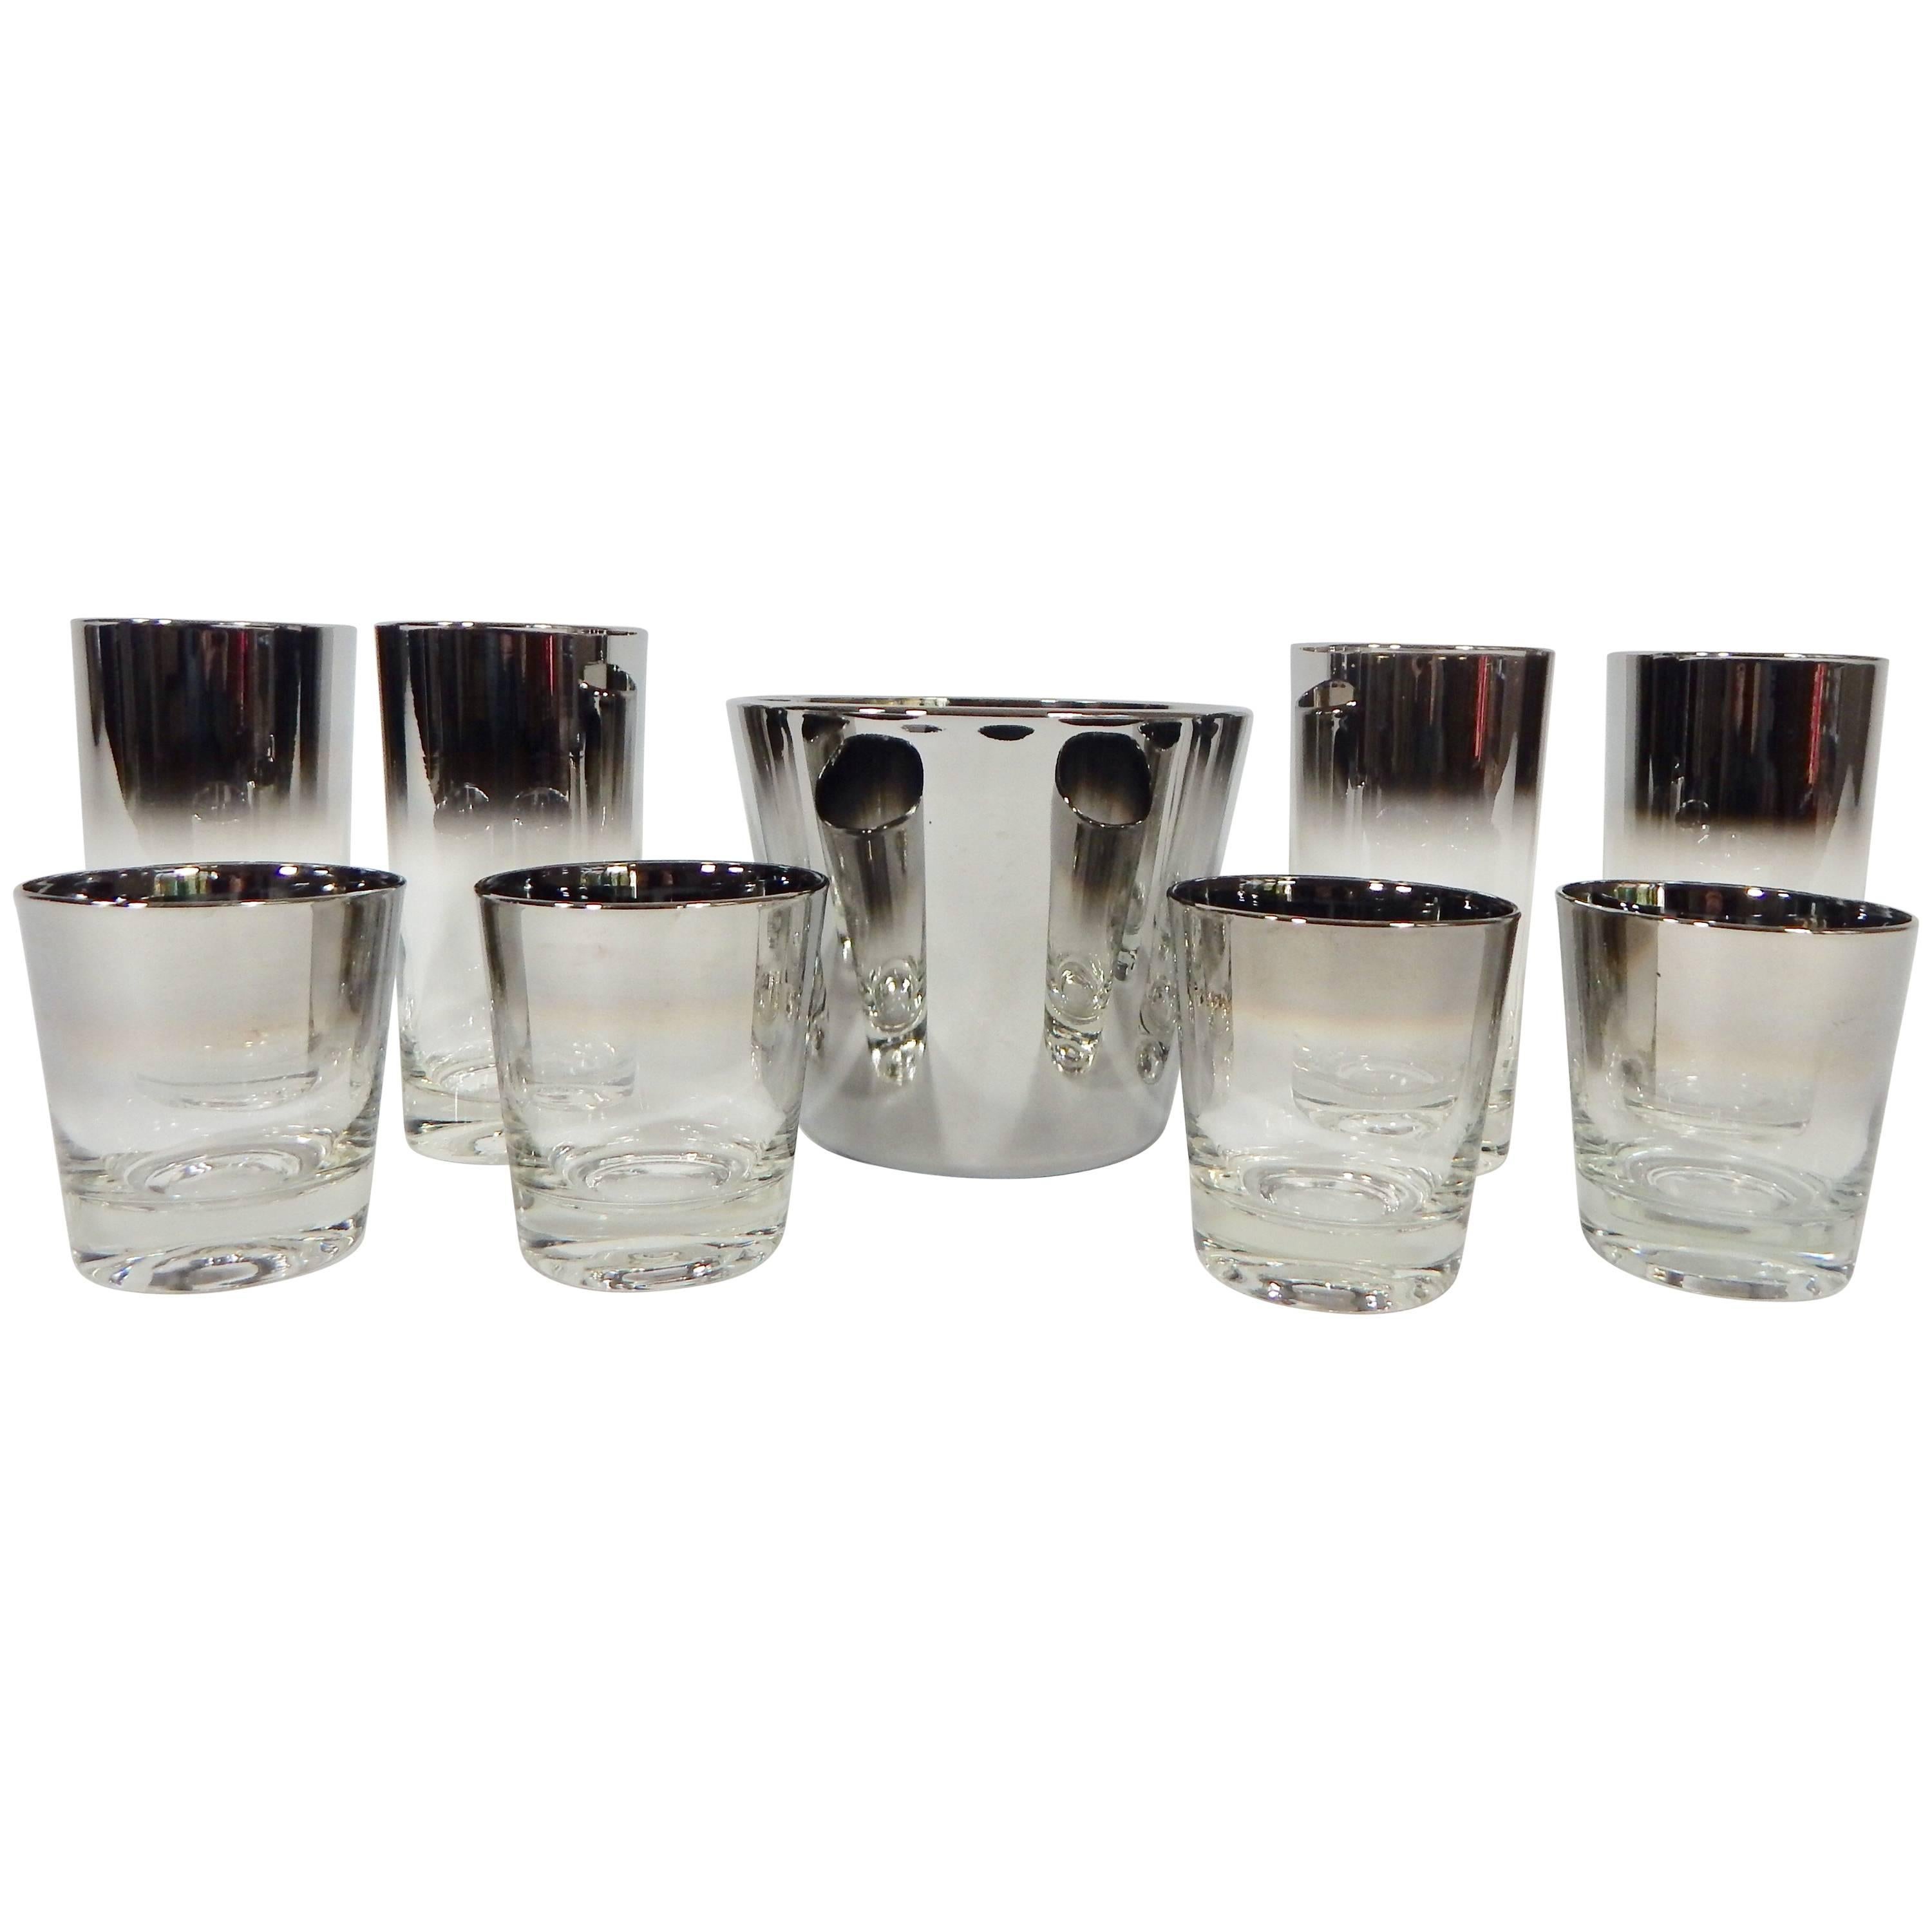 1960s Set of Bar Glassware Attributed to Dorothy Thorpe, Nine Pieces